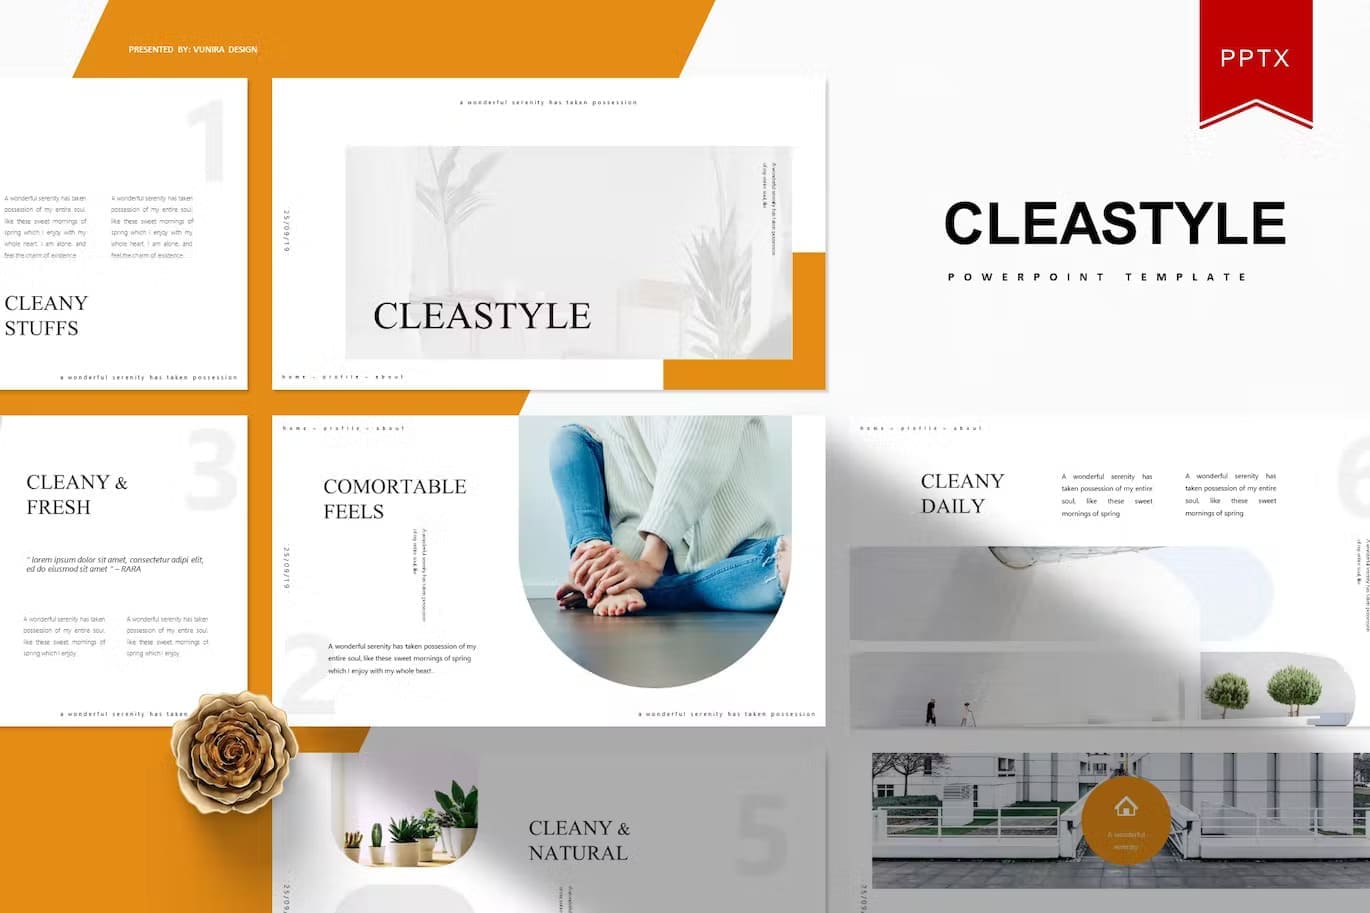 Cleastyle Powerpoint template.